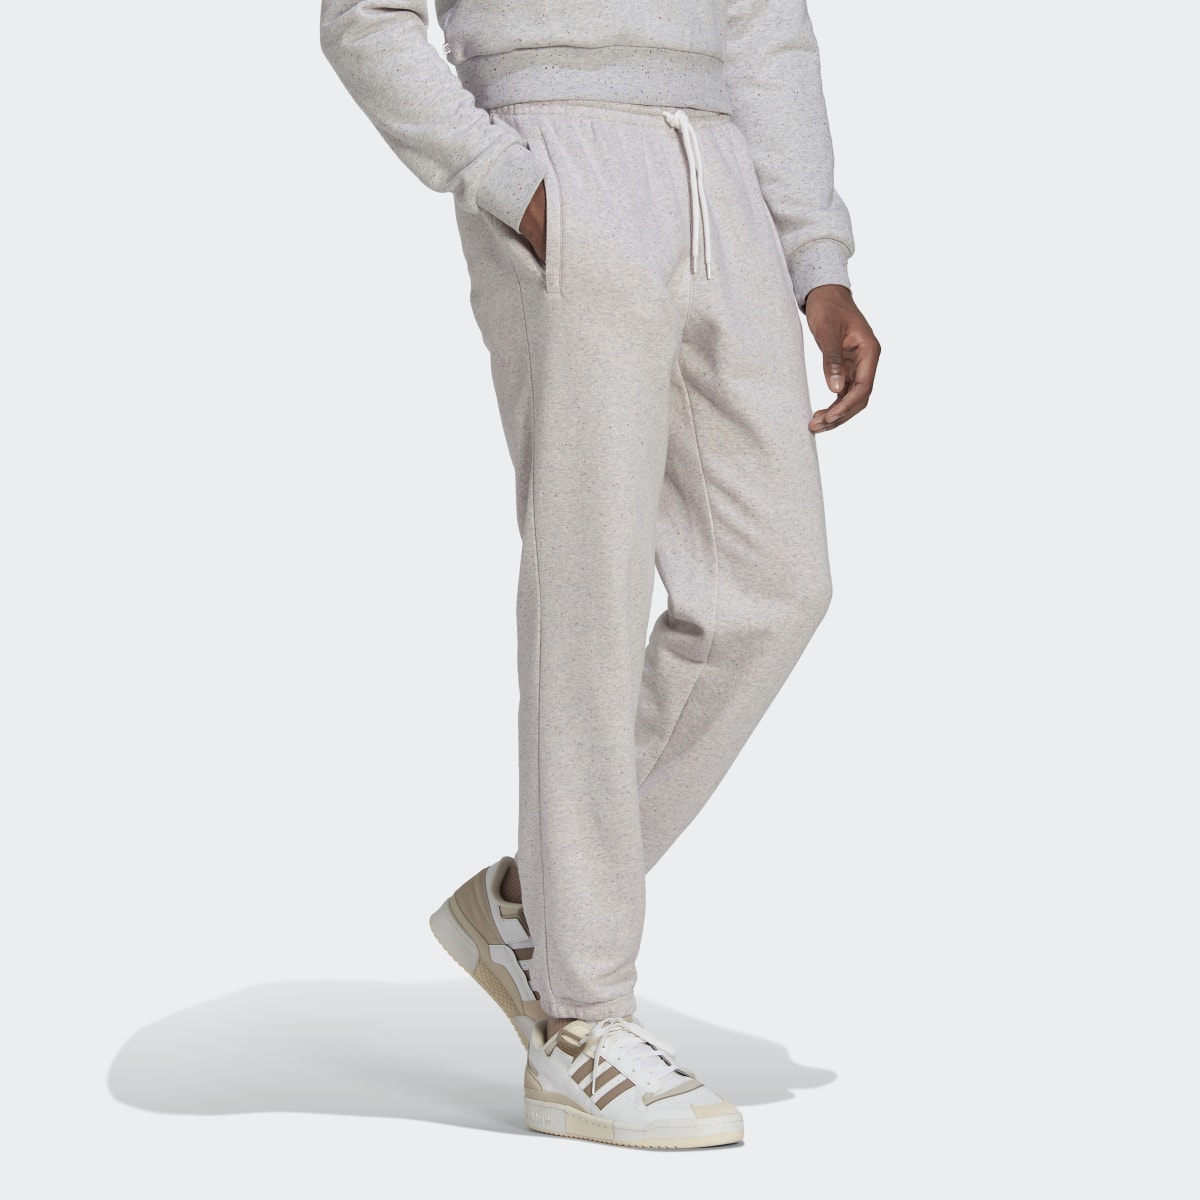 Adidas Essentials+ Made with Nature Sweat Joggers. 4